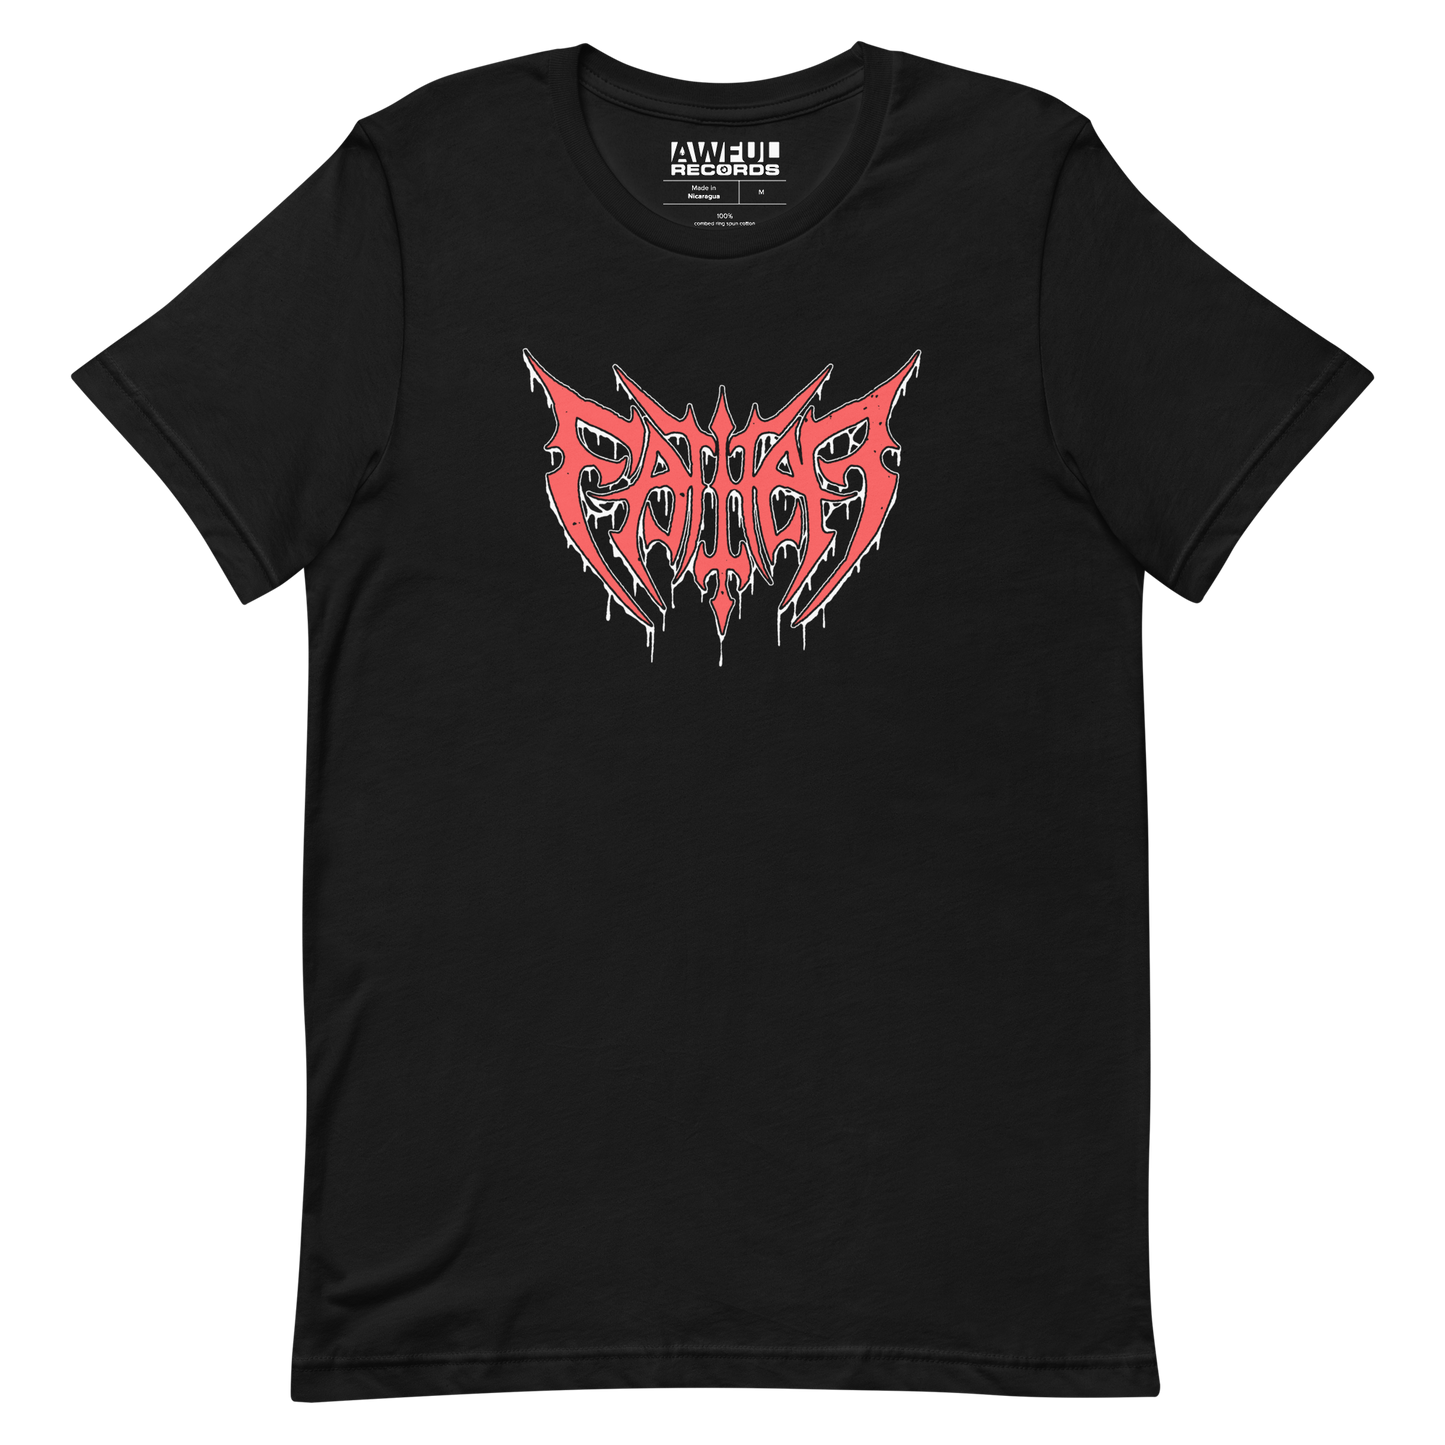 Father's Death Metal Tee